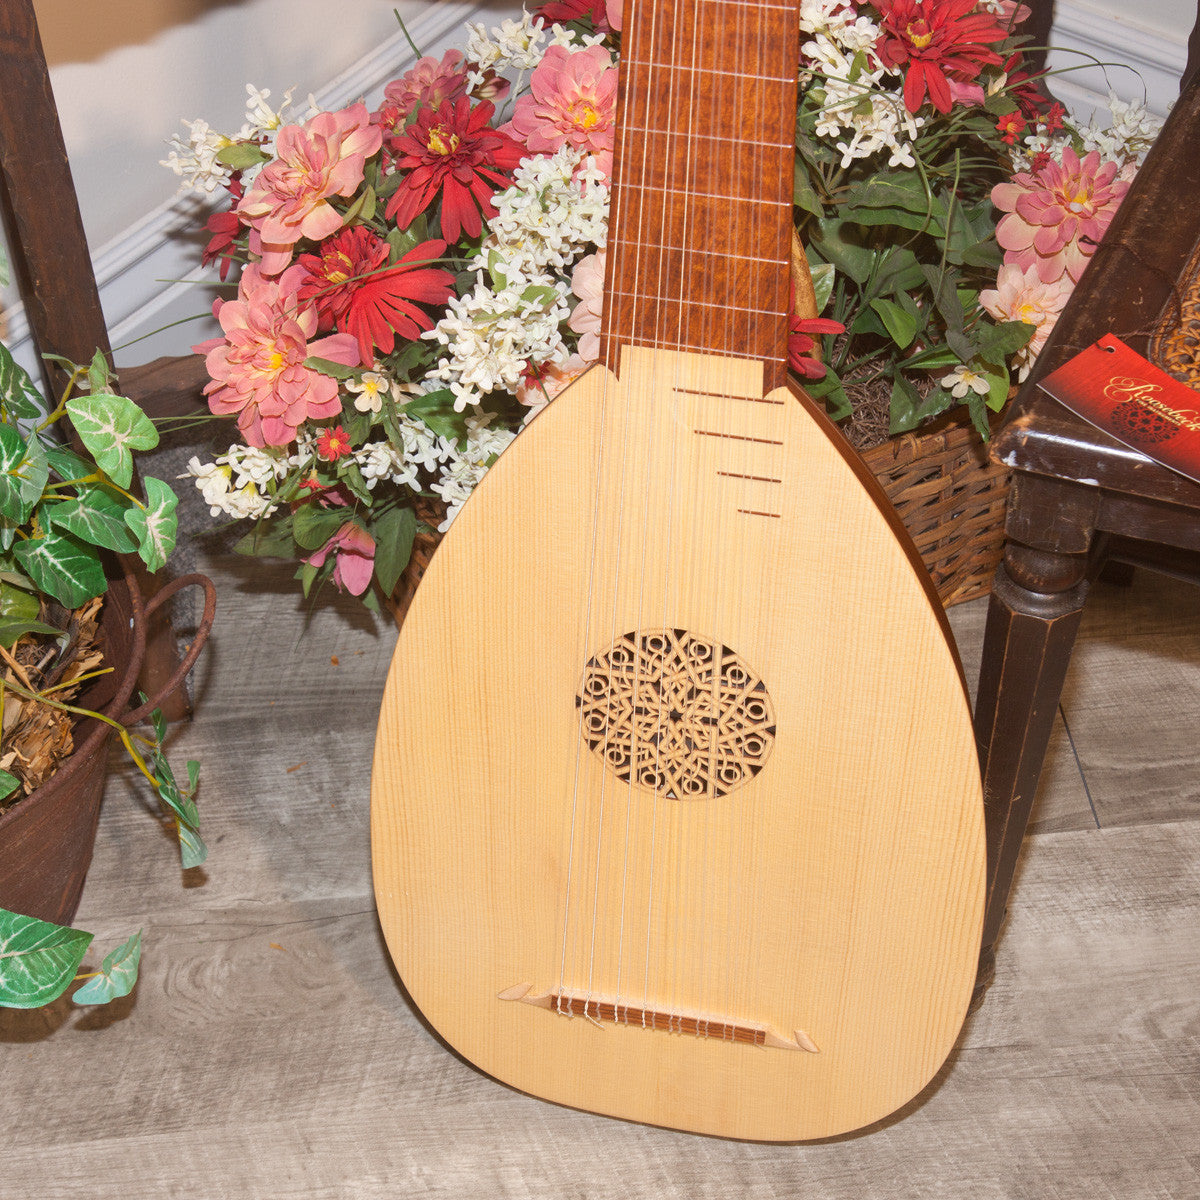 Roosebeck 8-Course Lute Sheesham & Canadian Spruce Lutes Roosebeck   